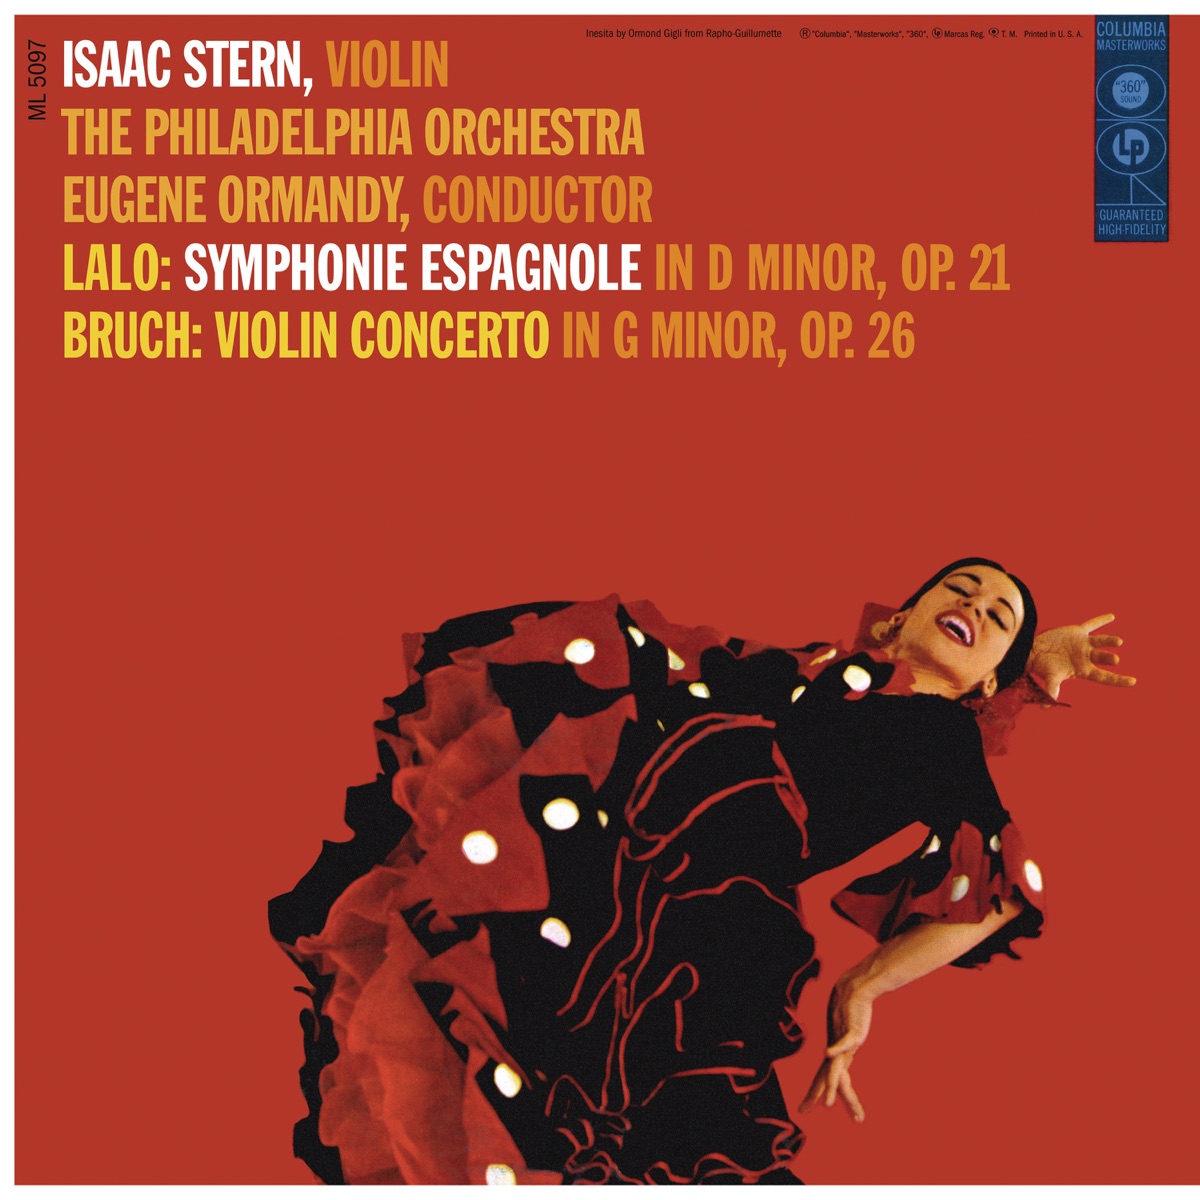 stak Forskelle delikat Lalo: Symphonie espagnole - Bruch: Violin Concerto No. 1 (Remastered) by  Isaac Stern, The Philadelphia Orchestra & Eugene Ormandy on Apple Music